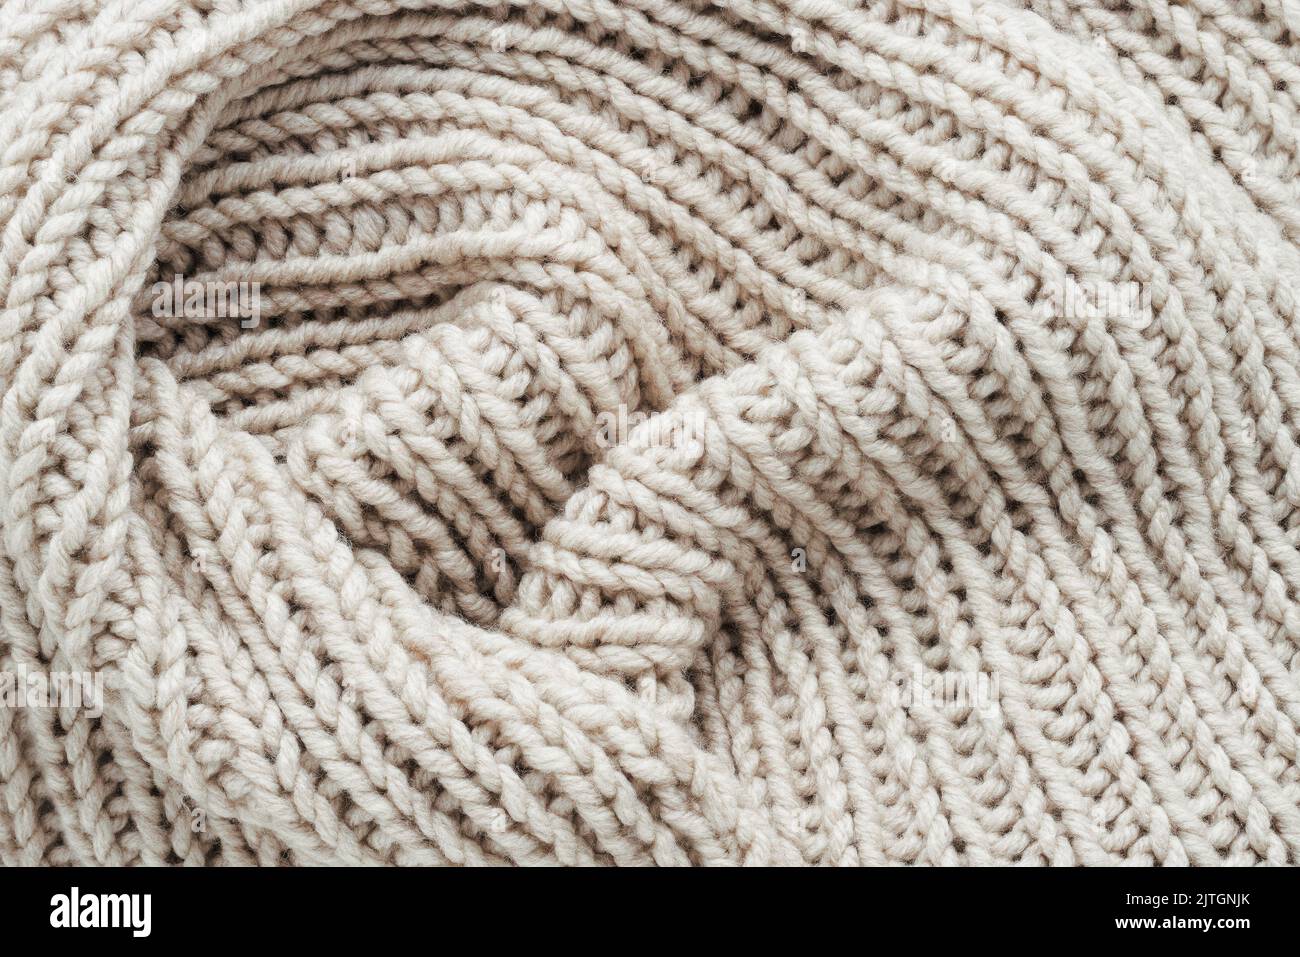 Knitting. Vertical striped beige knit fabric texture, knitted pattern background. Top view. Stock Photo